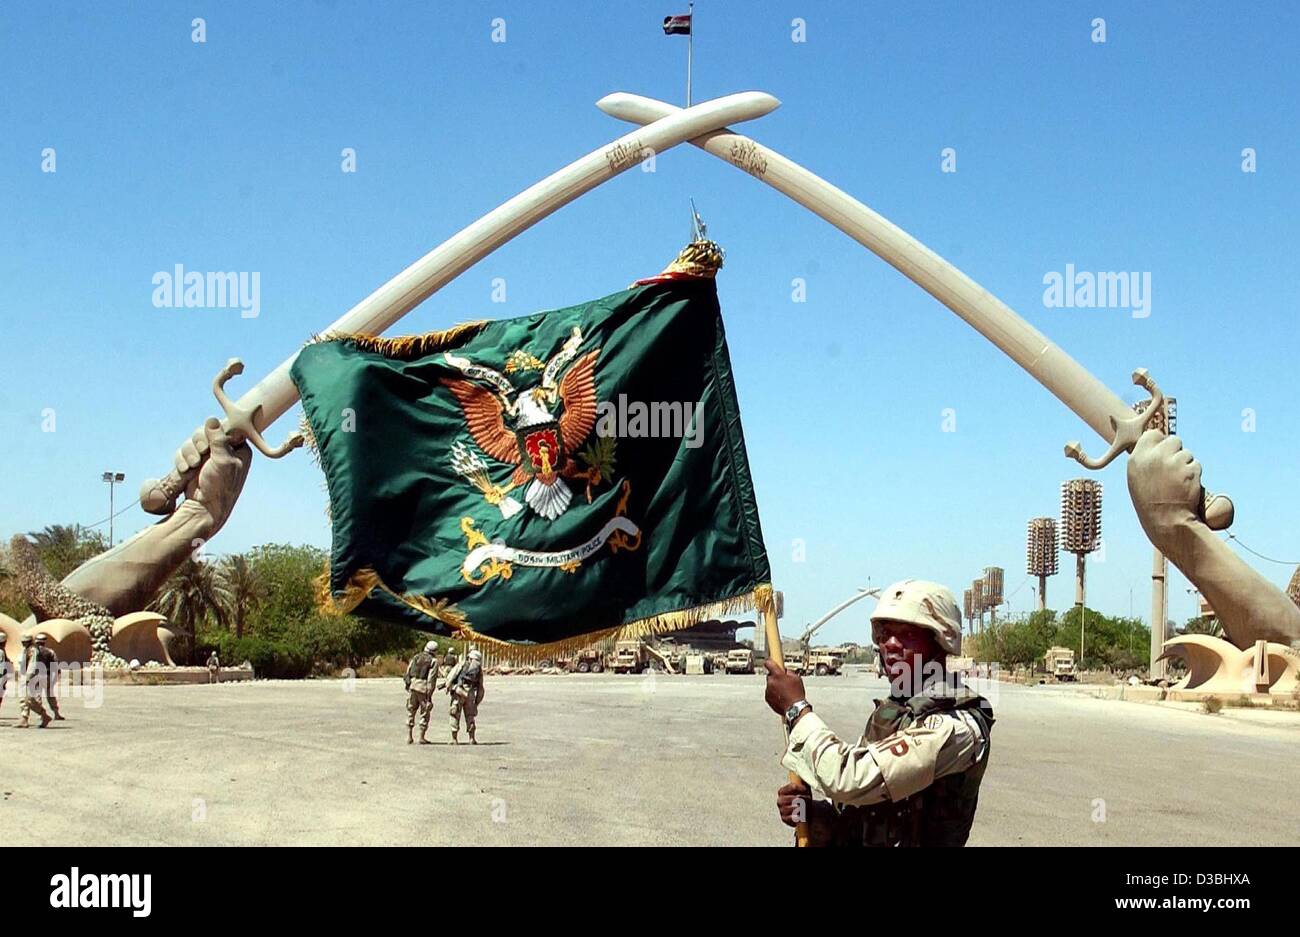 (dpa) - A US soldier flies the flag of the 504th Military Police squad in front of the Celebration Square monument in Baghdad, 1 May 2003. Stock Photo